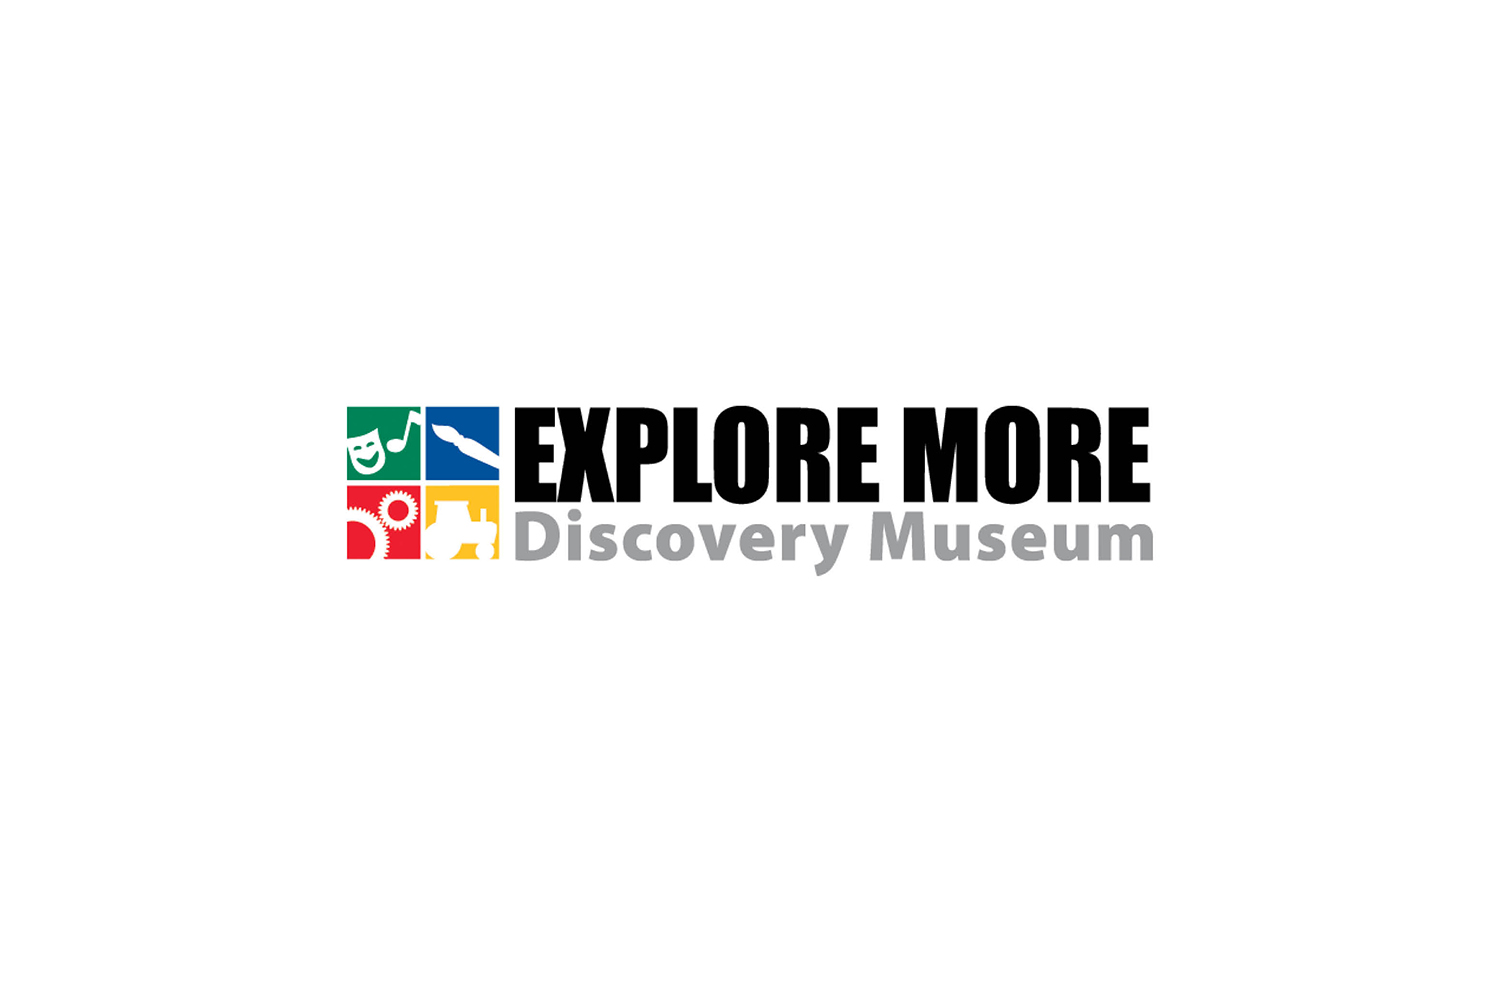 Boss_Display_Client_Explore_More_Discovery_Museum_Logo.jpg